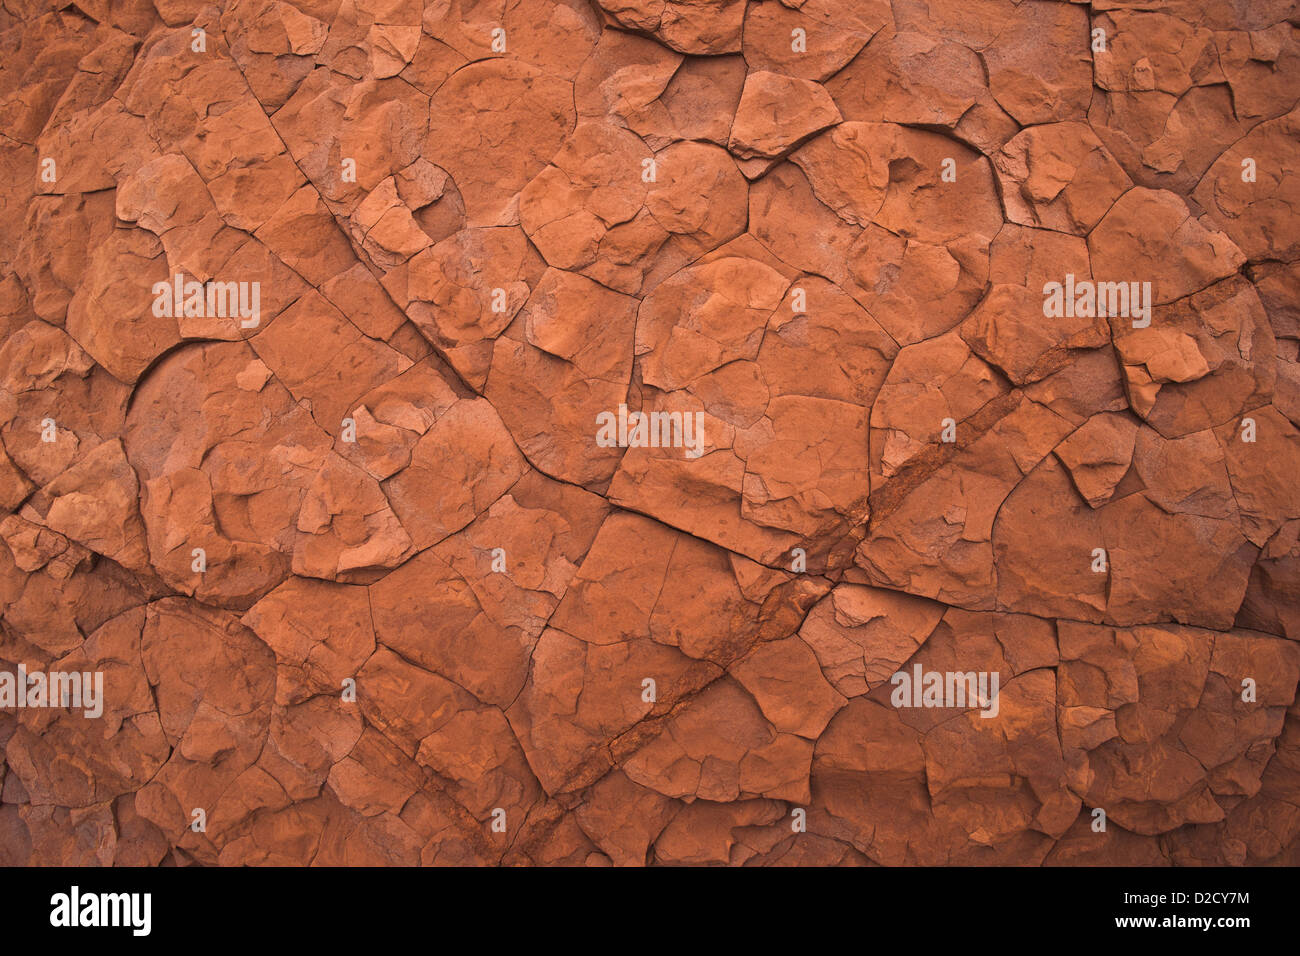 A macro image of a sandstone boulder on the shore. Stock Photo